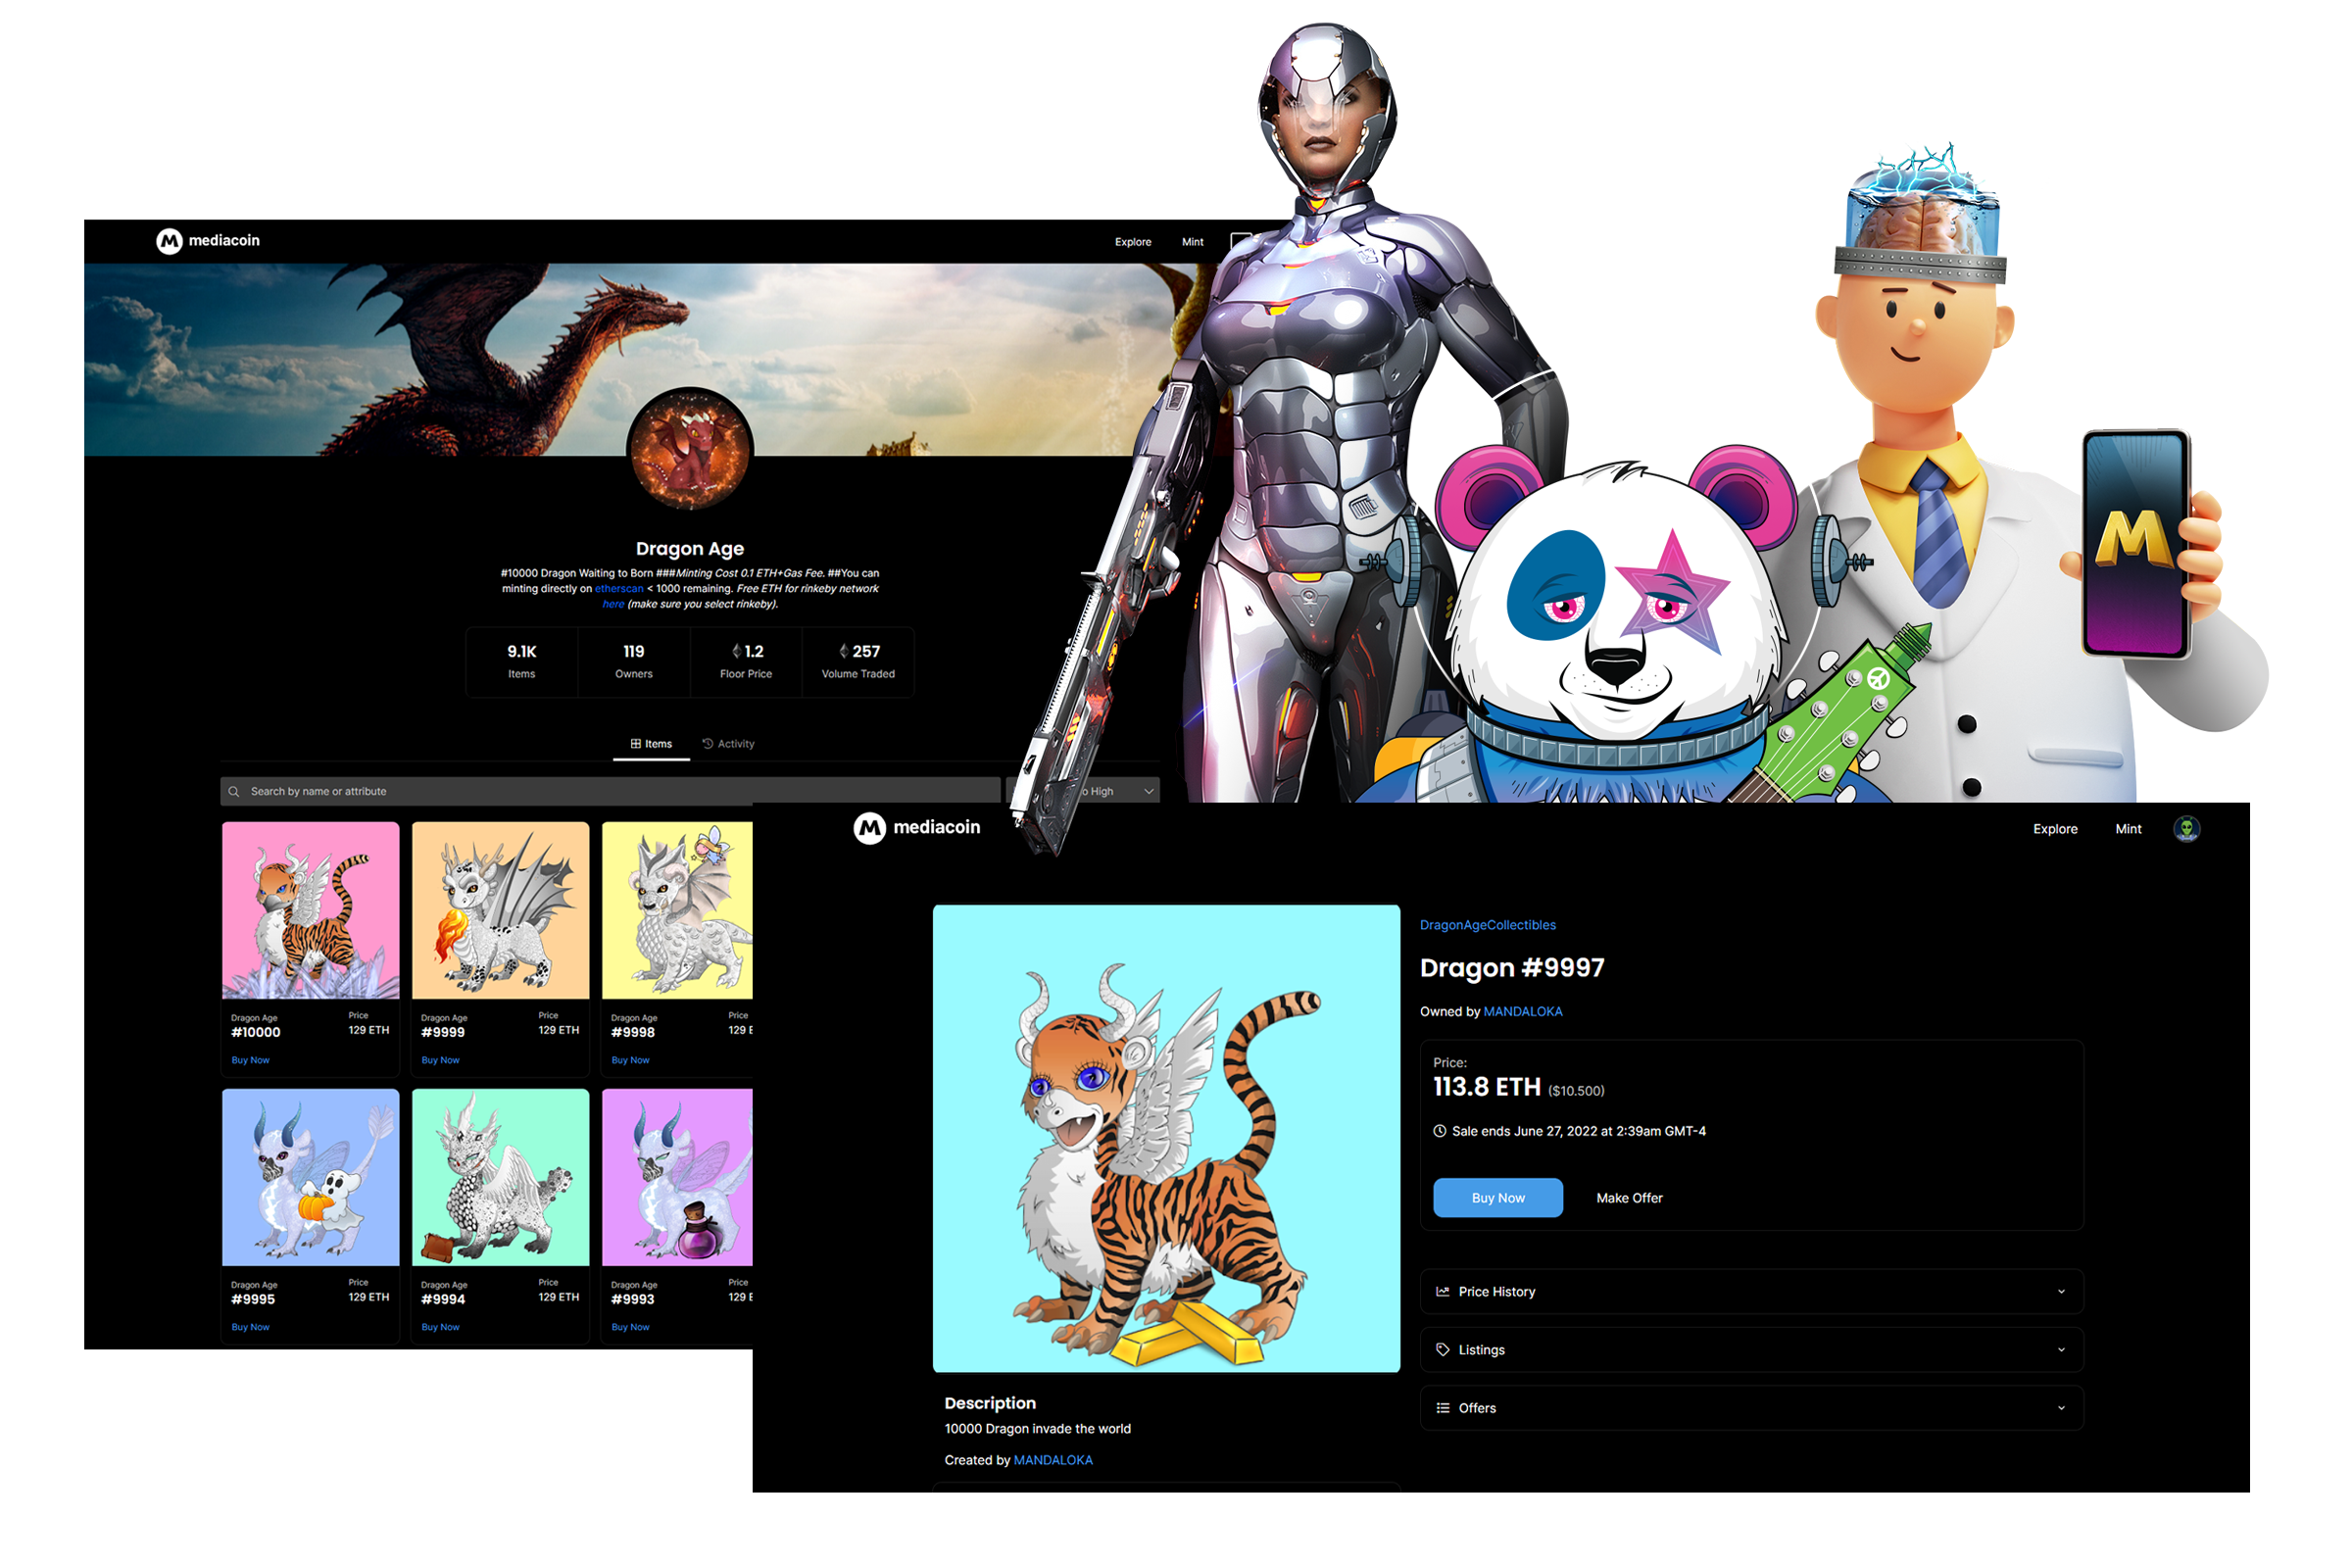 Image of MediaCoin screen for creating and managing collections, as well as an inset of three metaverse gaming characters: a cybersoldier woman with a laser rifle, a glam-space-age panda with a helmet and guitar, and a mad scientist. featured Image